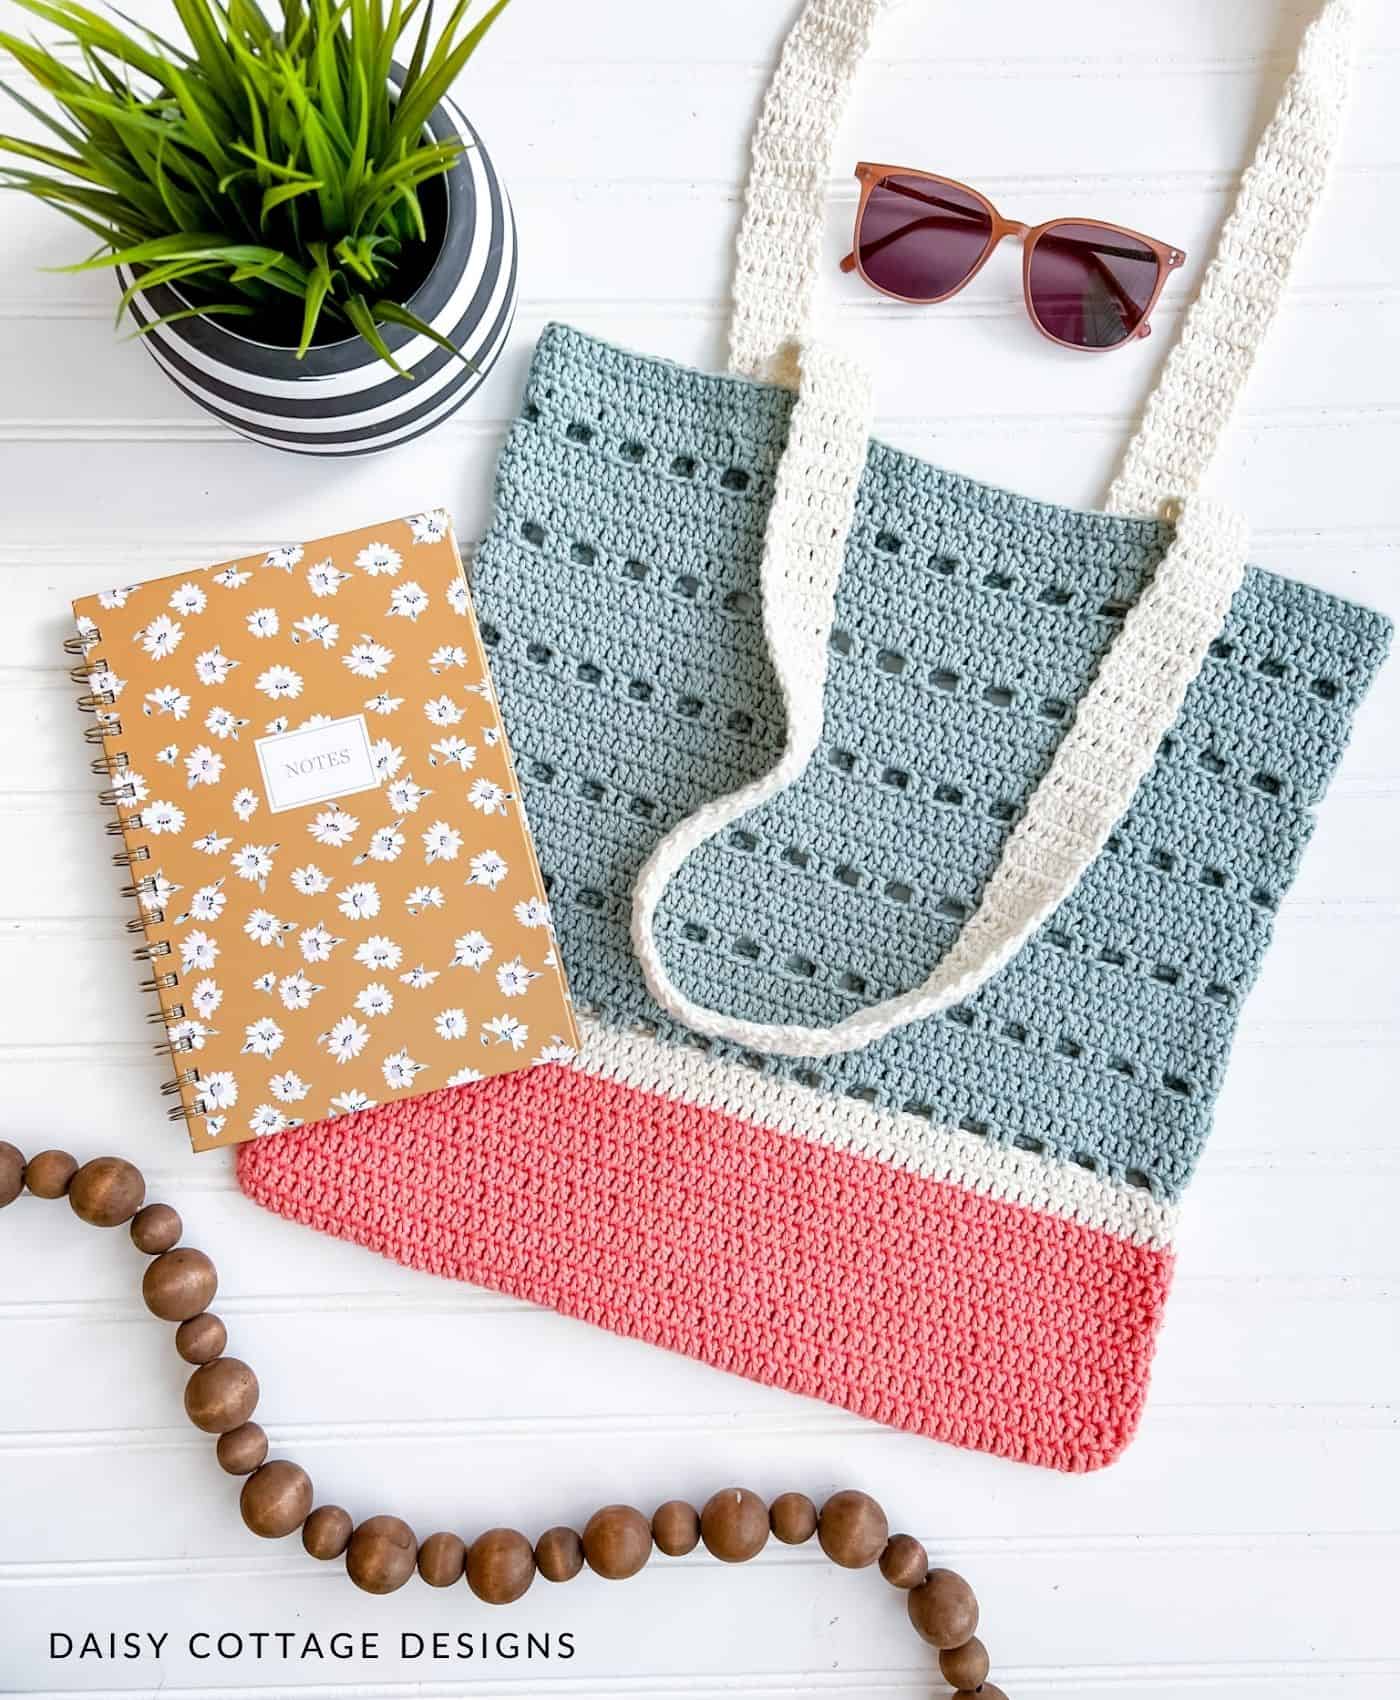 Crochet Tote Bag with sunglasses and notebook